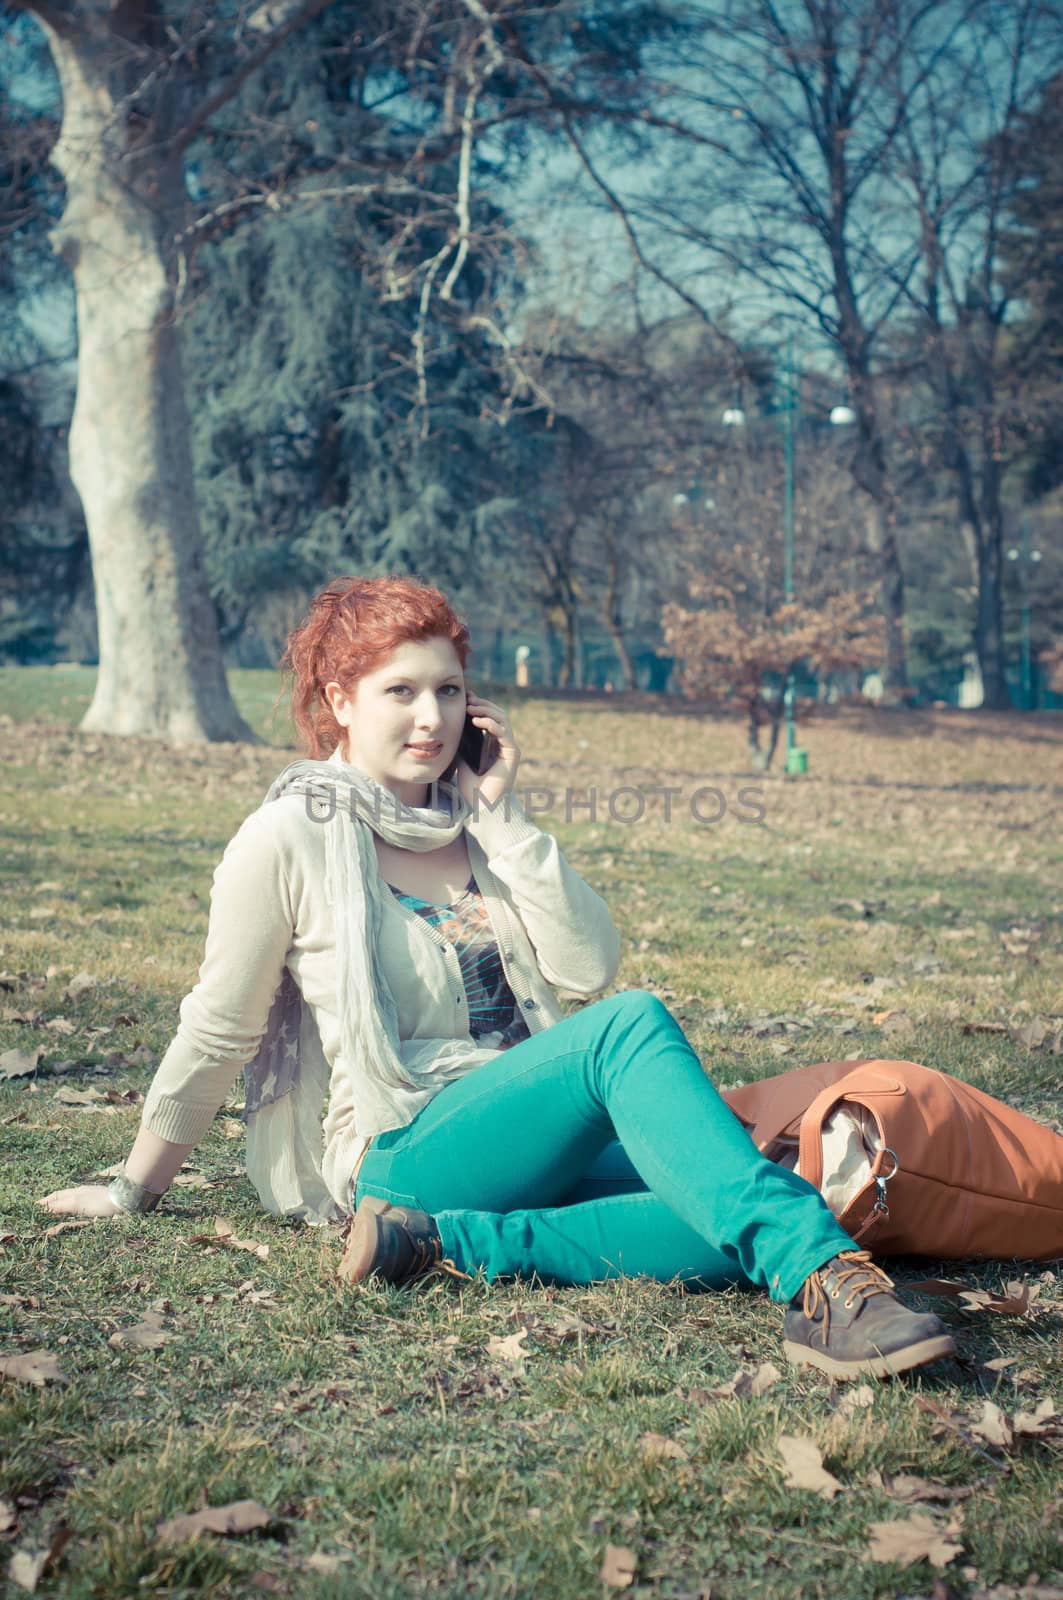 red long hair girl at the park on the phone in spring 